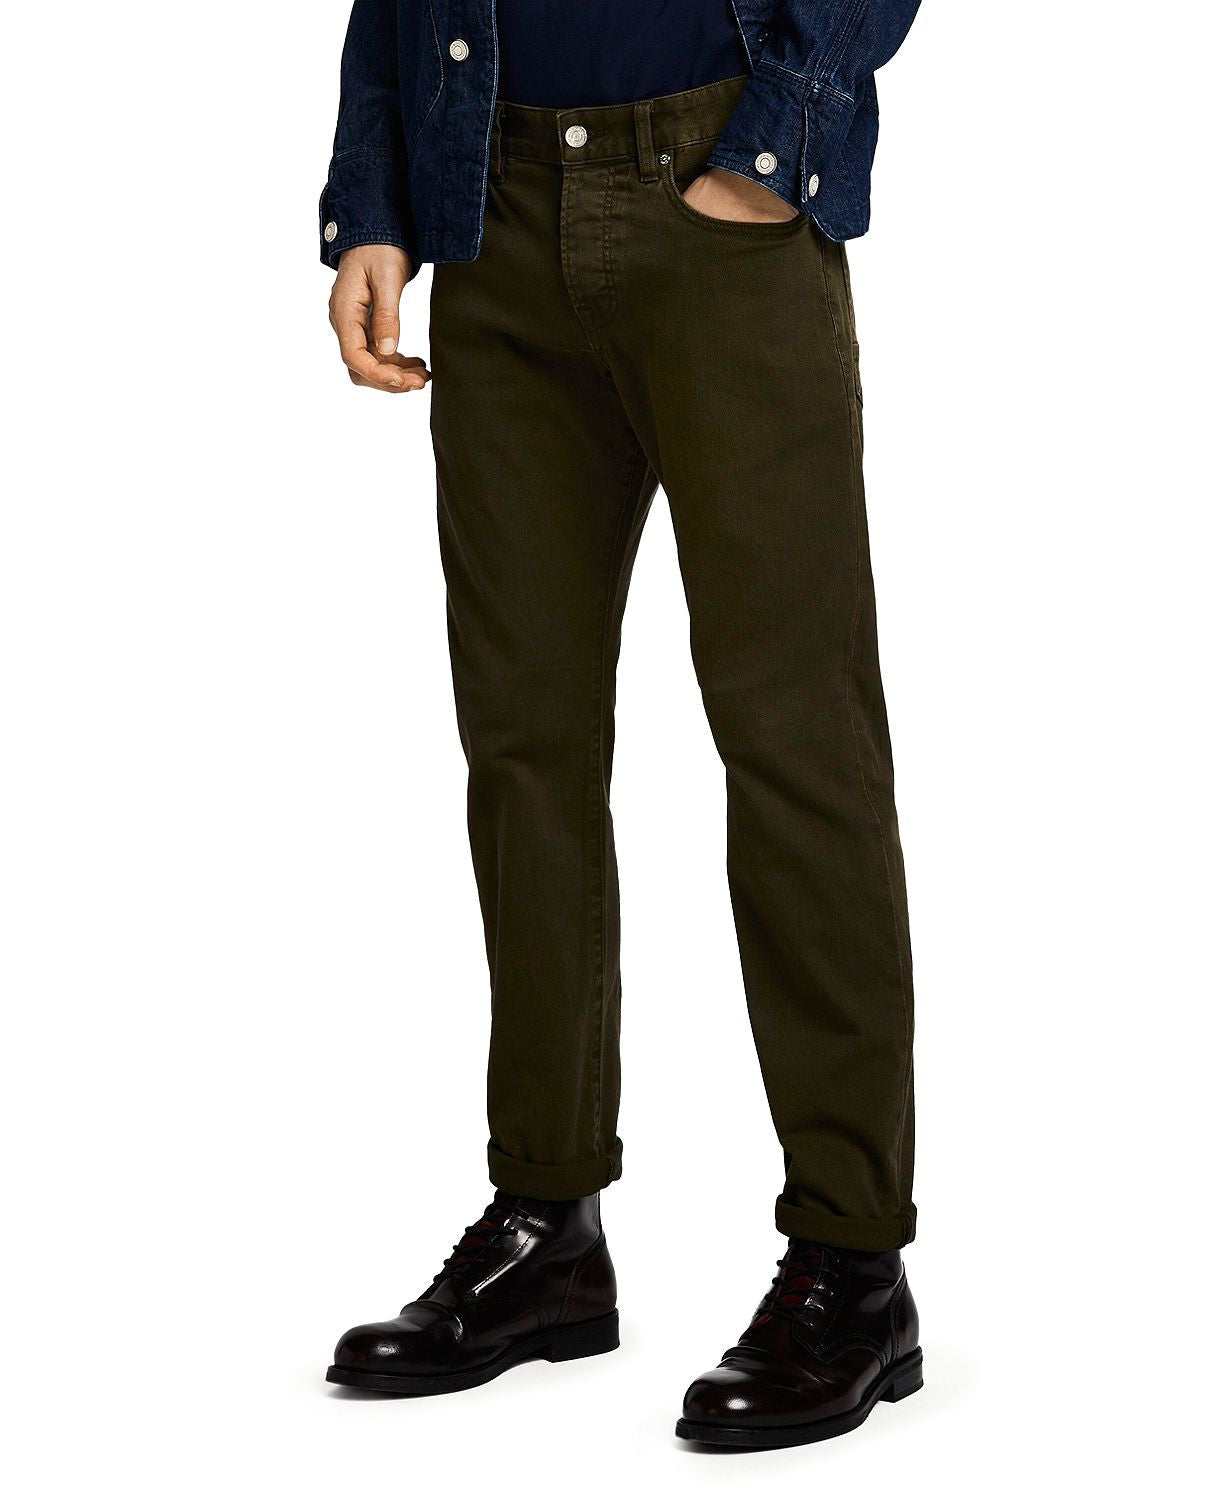 Scotch & Soda Ralston Skinny Fit Jeans In Military Green Military Green